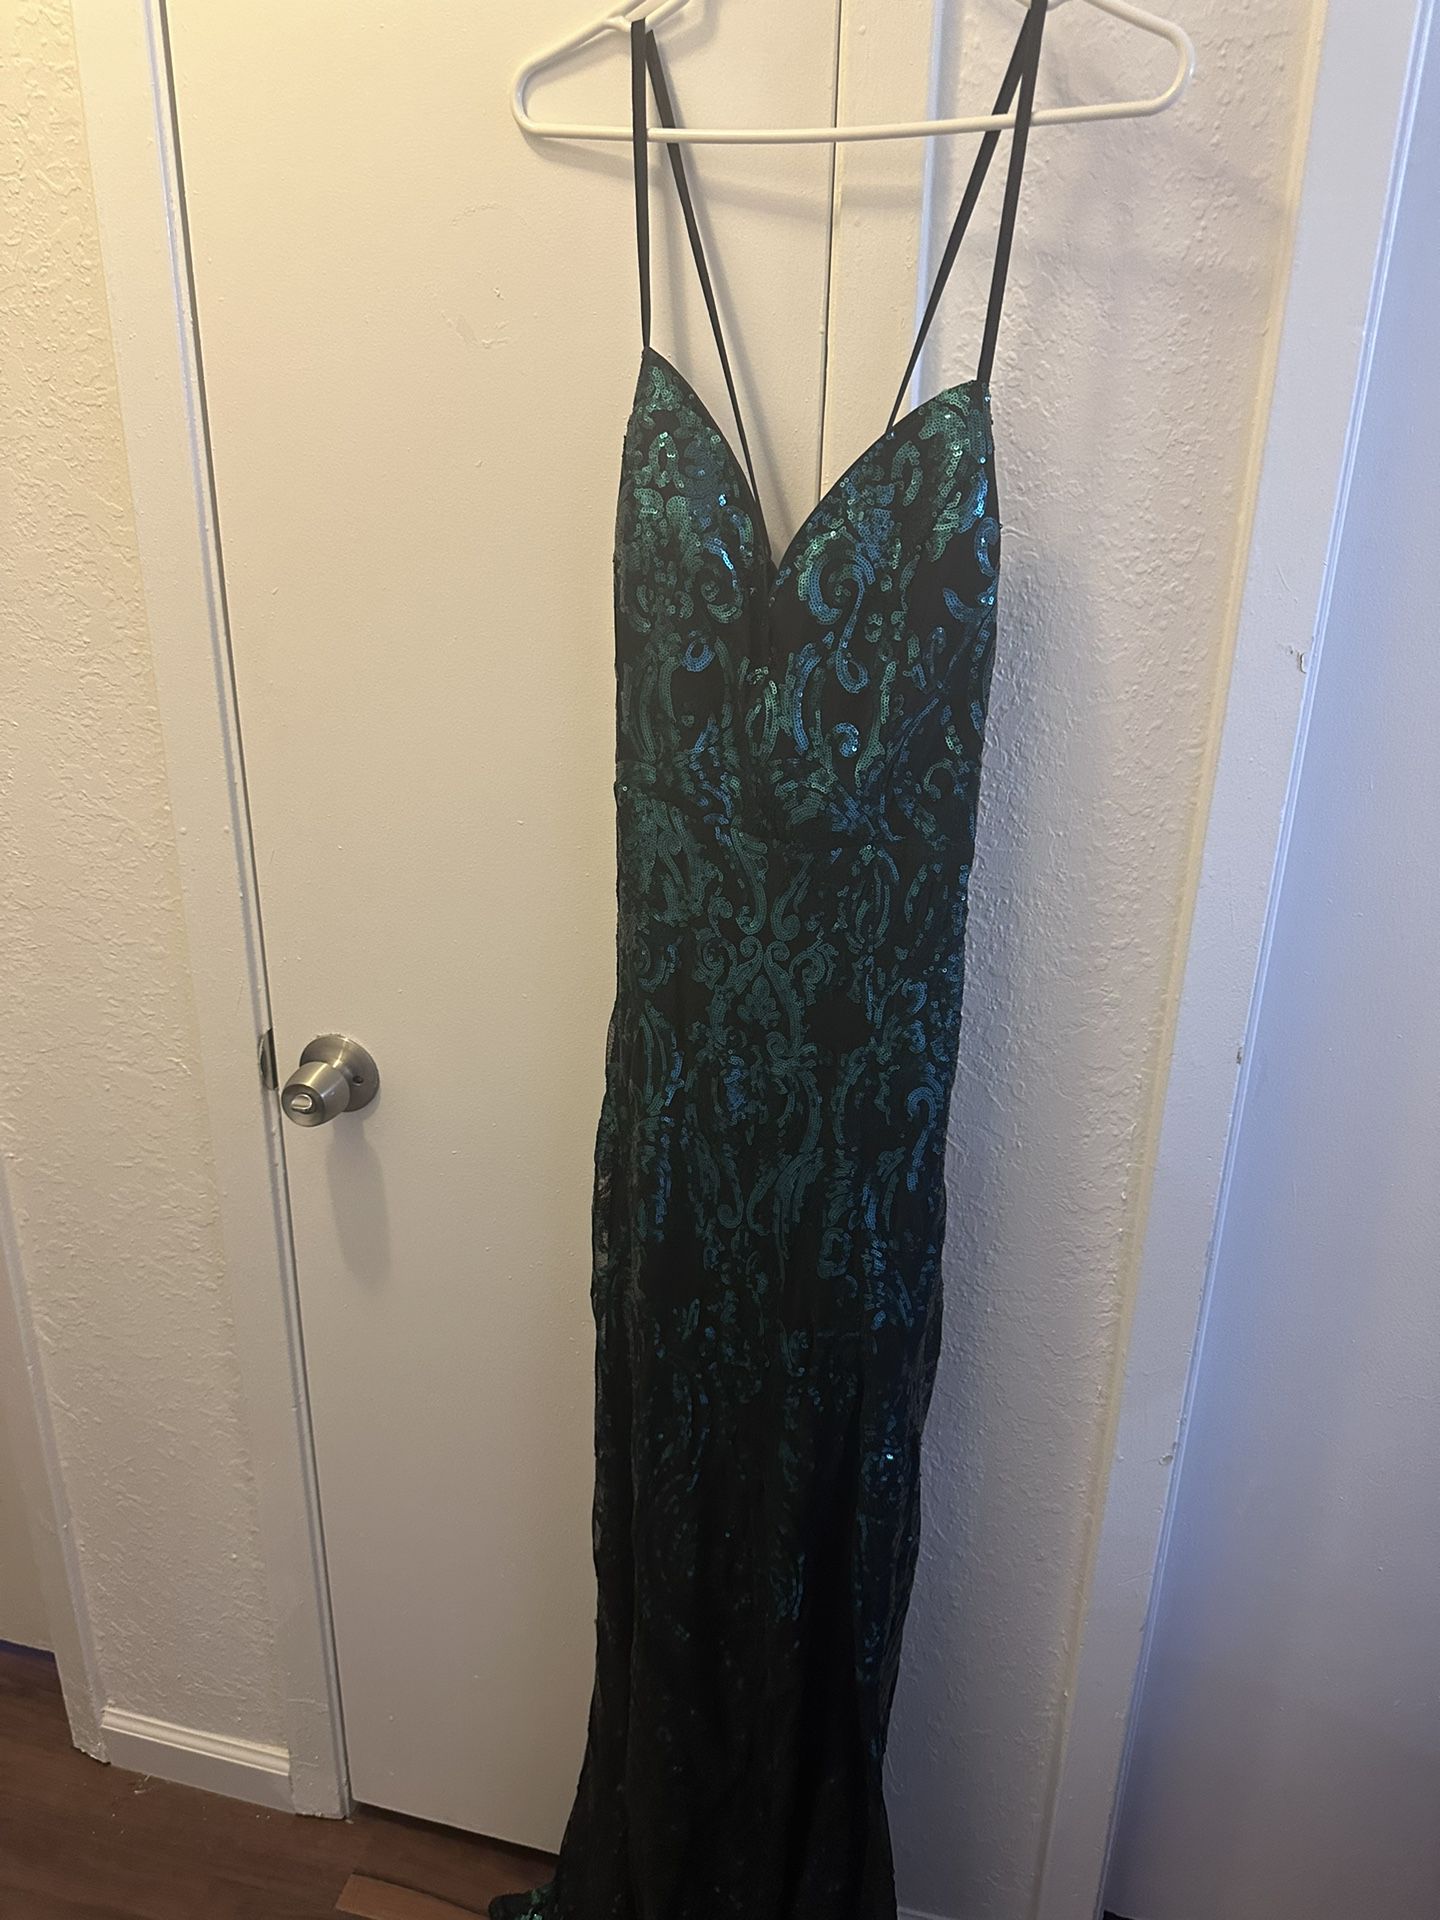 Black and Green Prom dress 